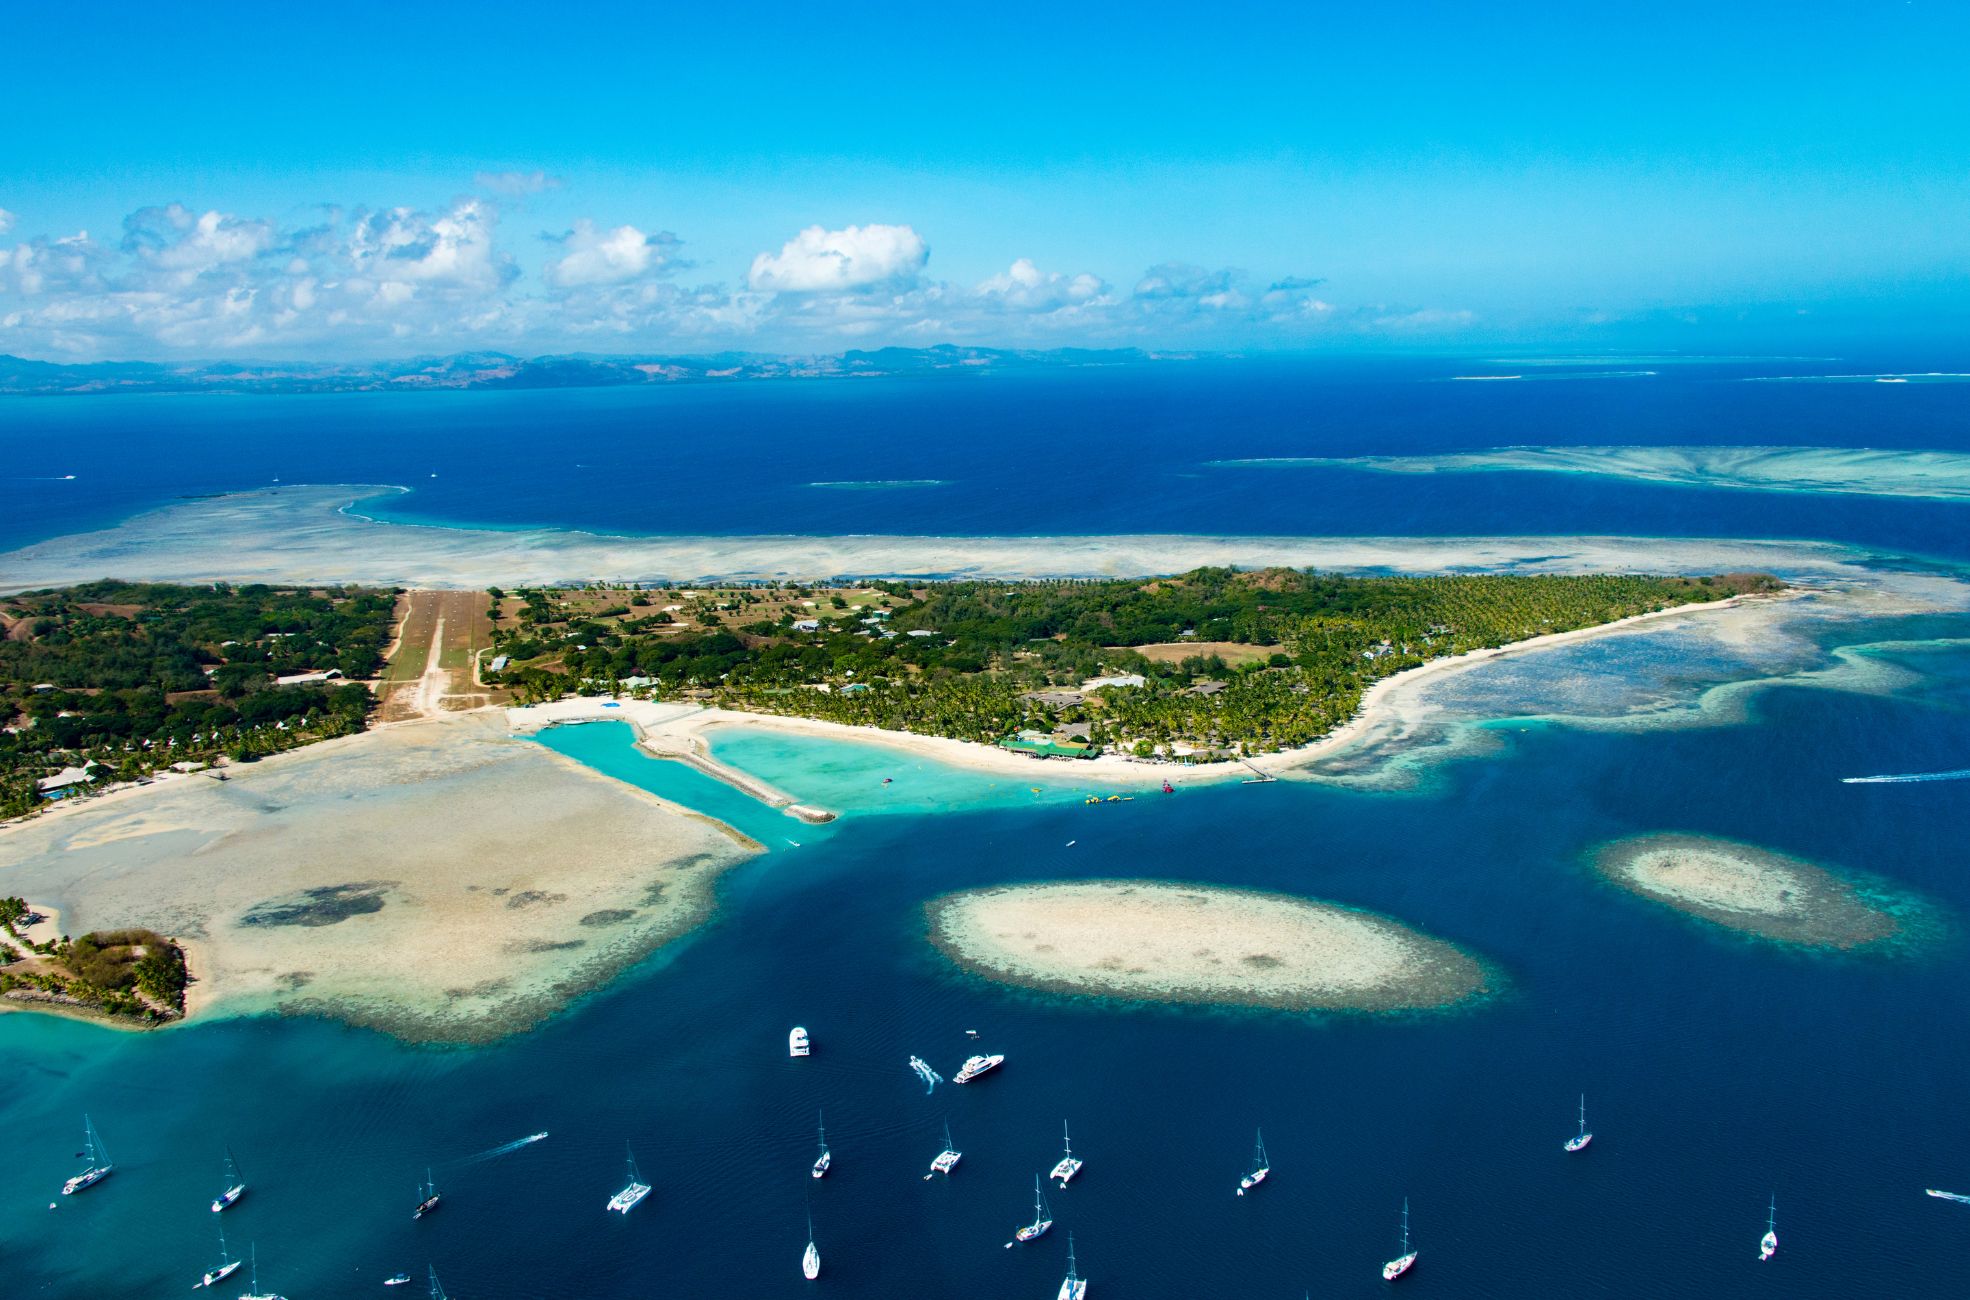 An aerial view of the blue Fijian waters.